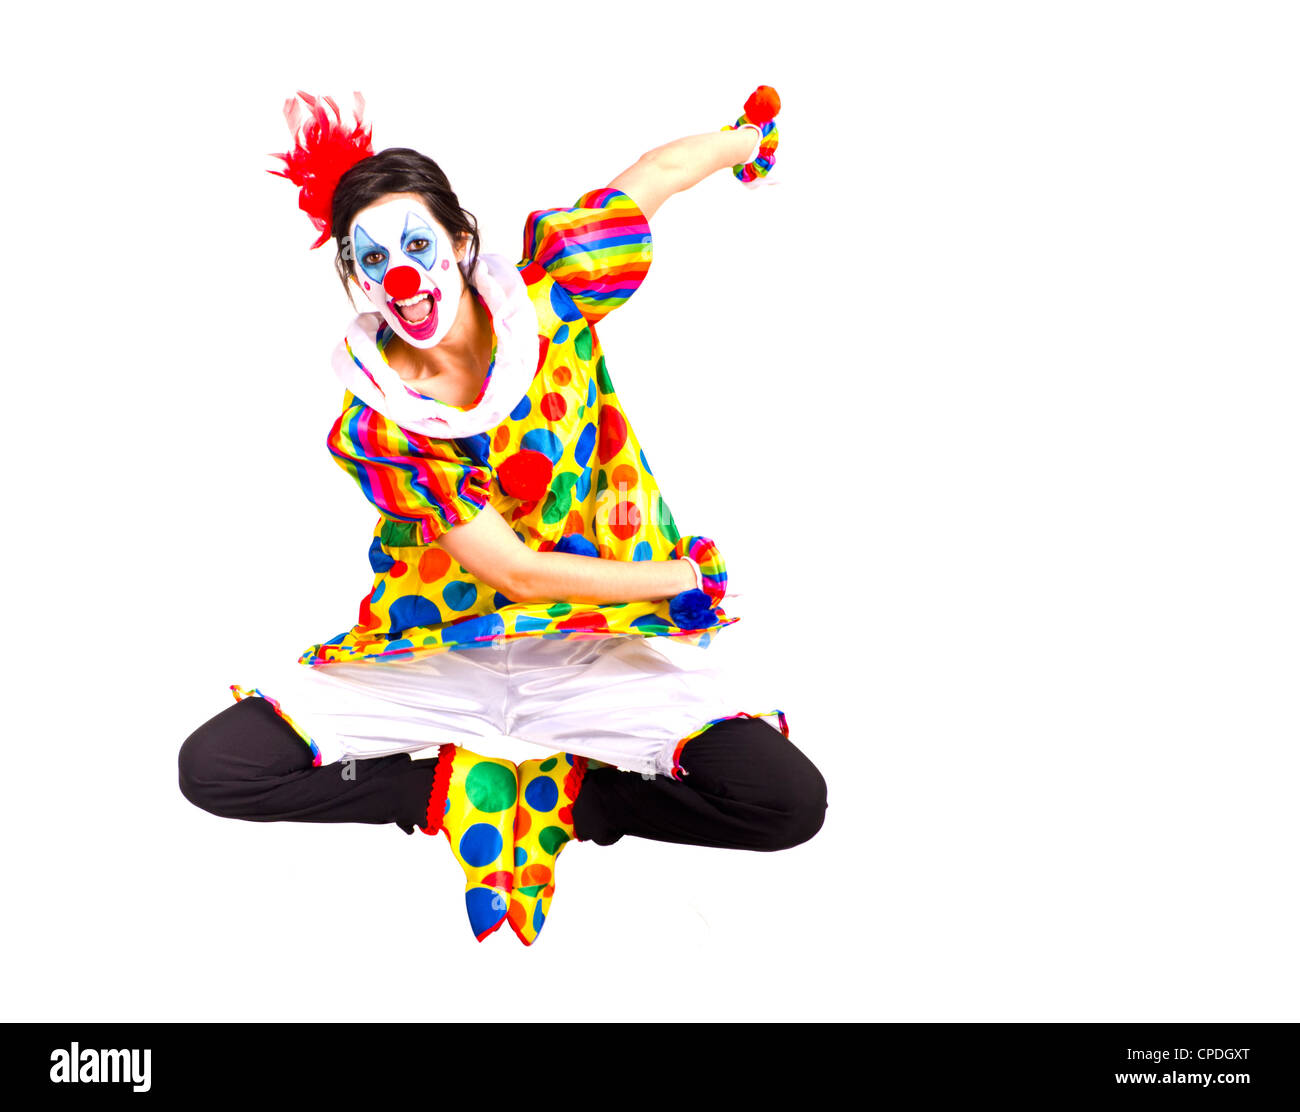 Girl Clowning around in Mid Air Stock Photo